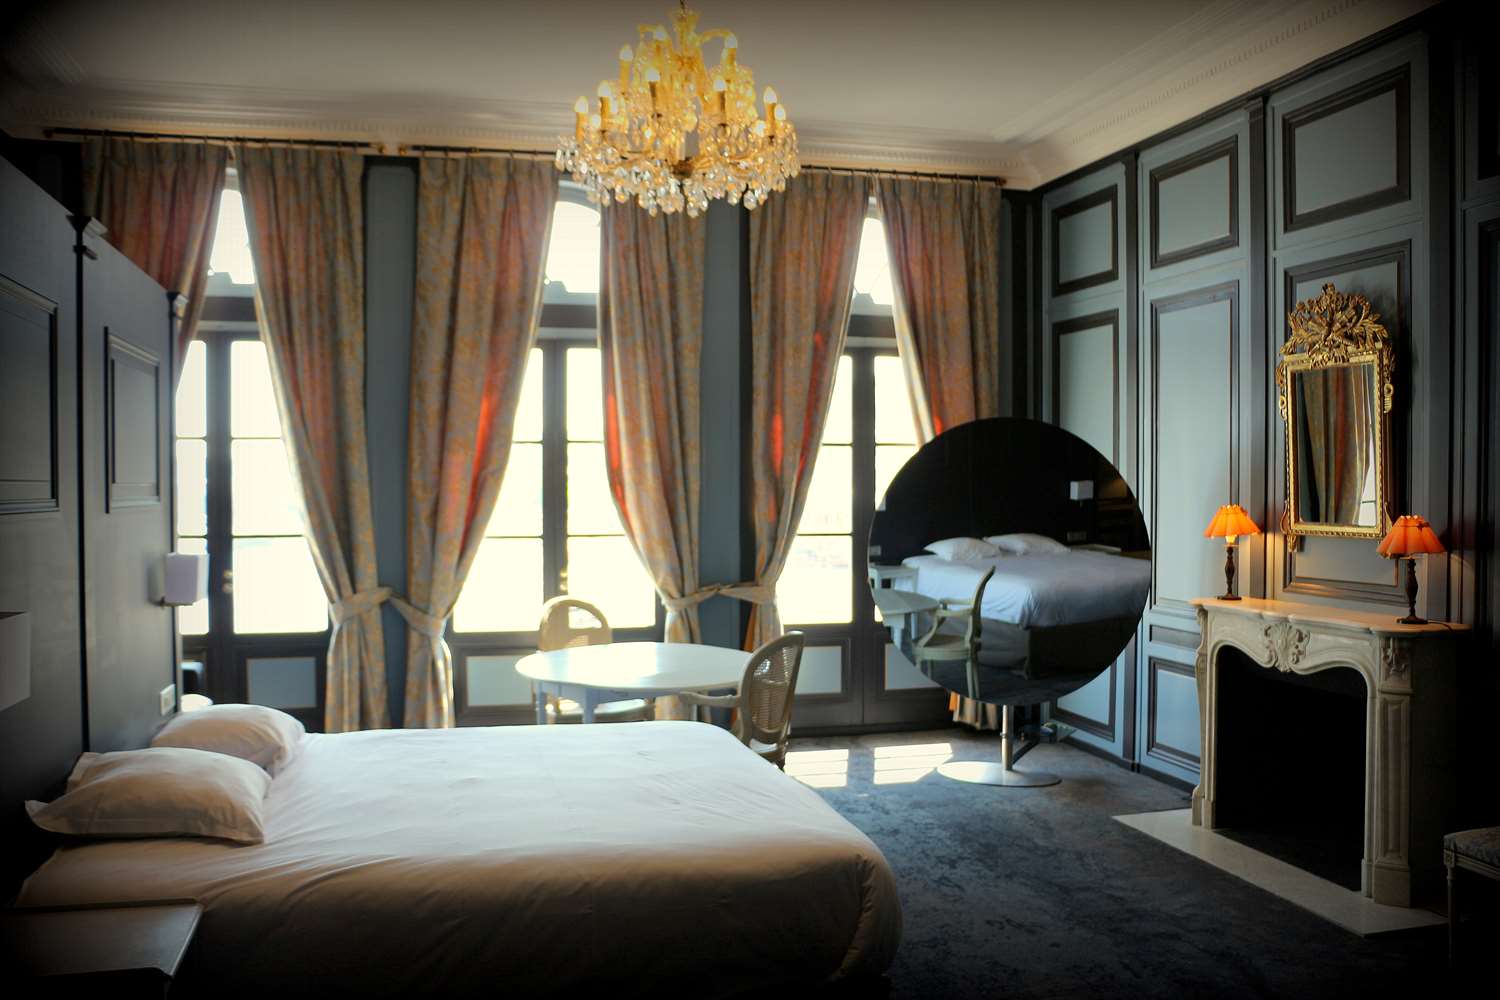 Le Cheval Blanc is the Hottest New Hotel in Paris - Air Mail